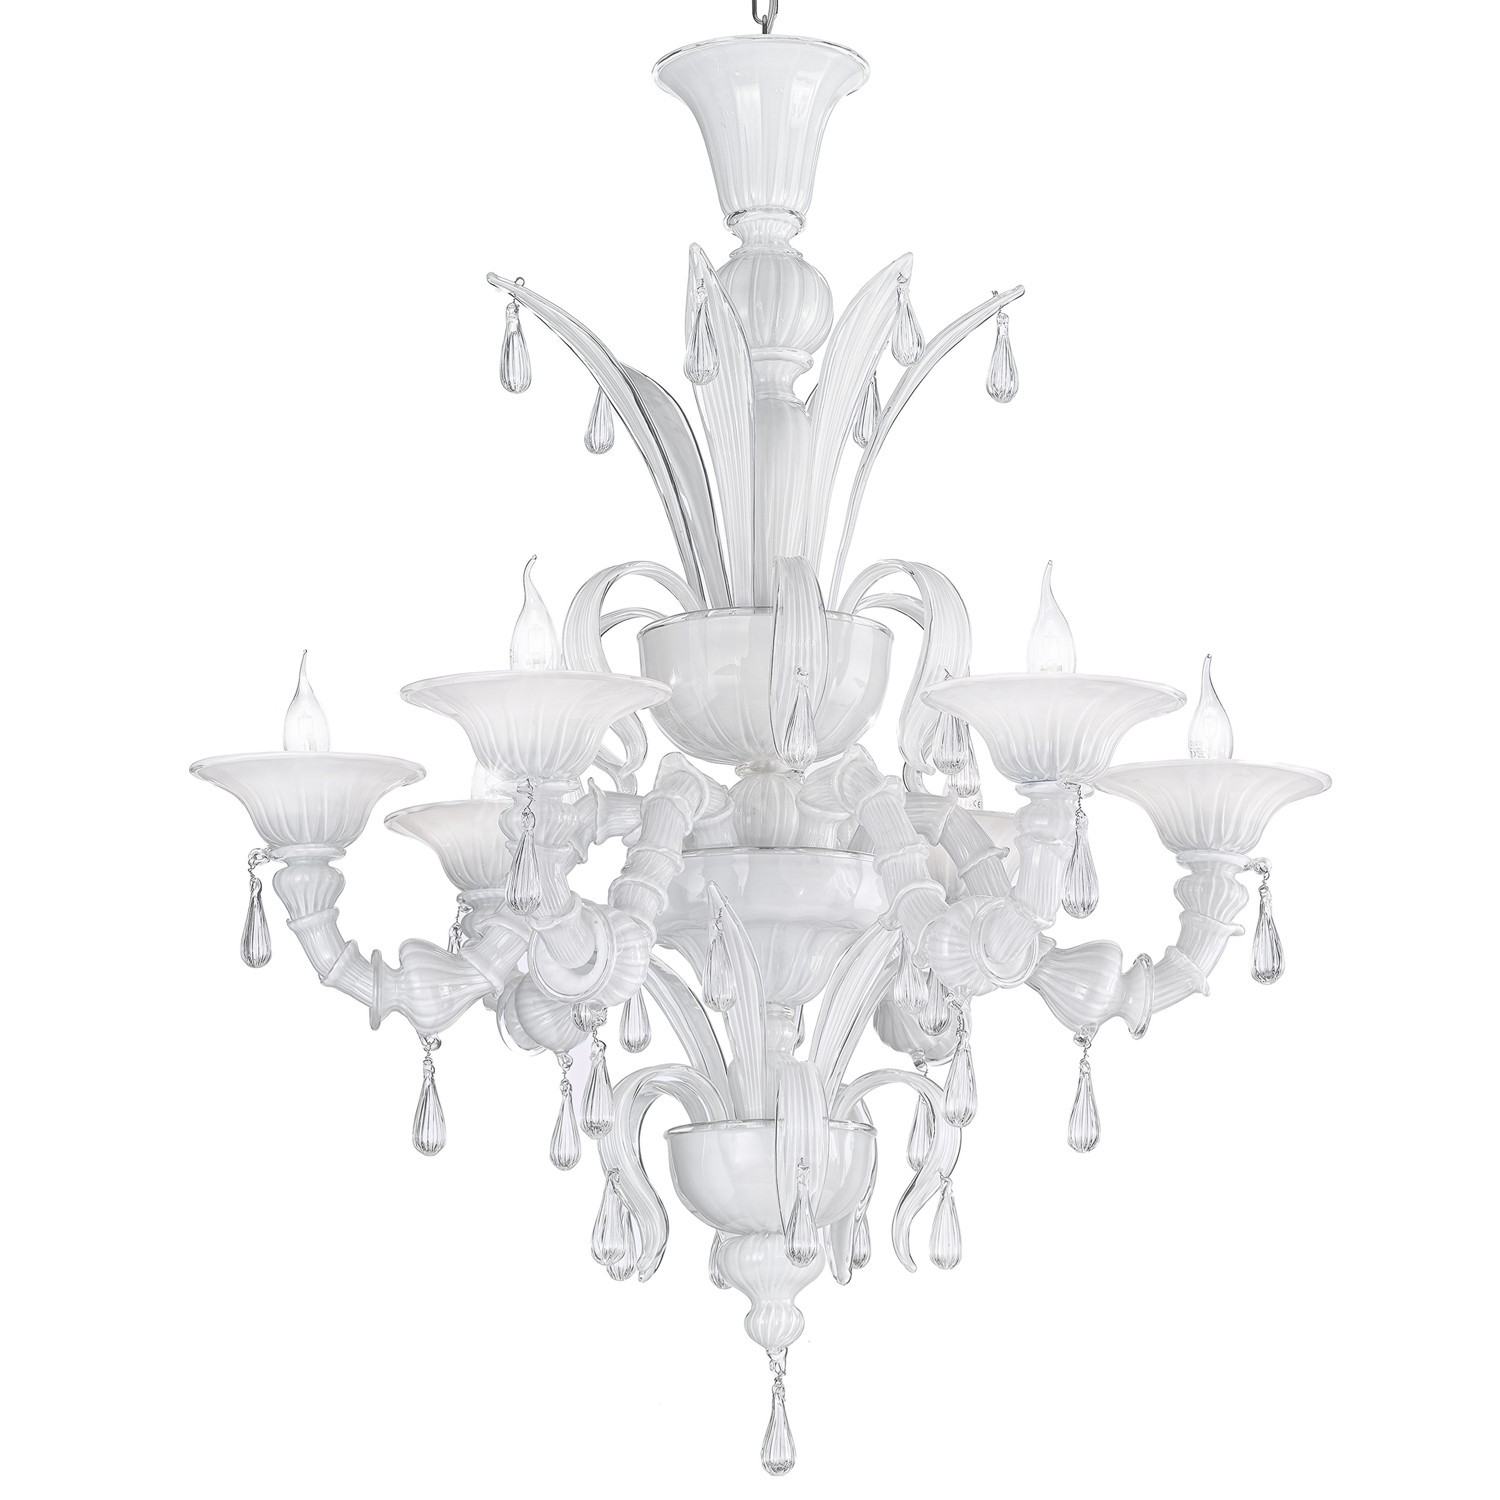 Venetian glass chandelier in white milk and crystal glass